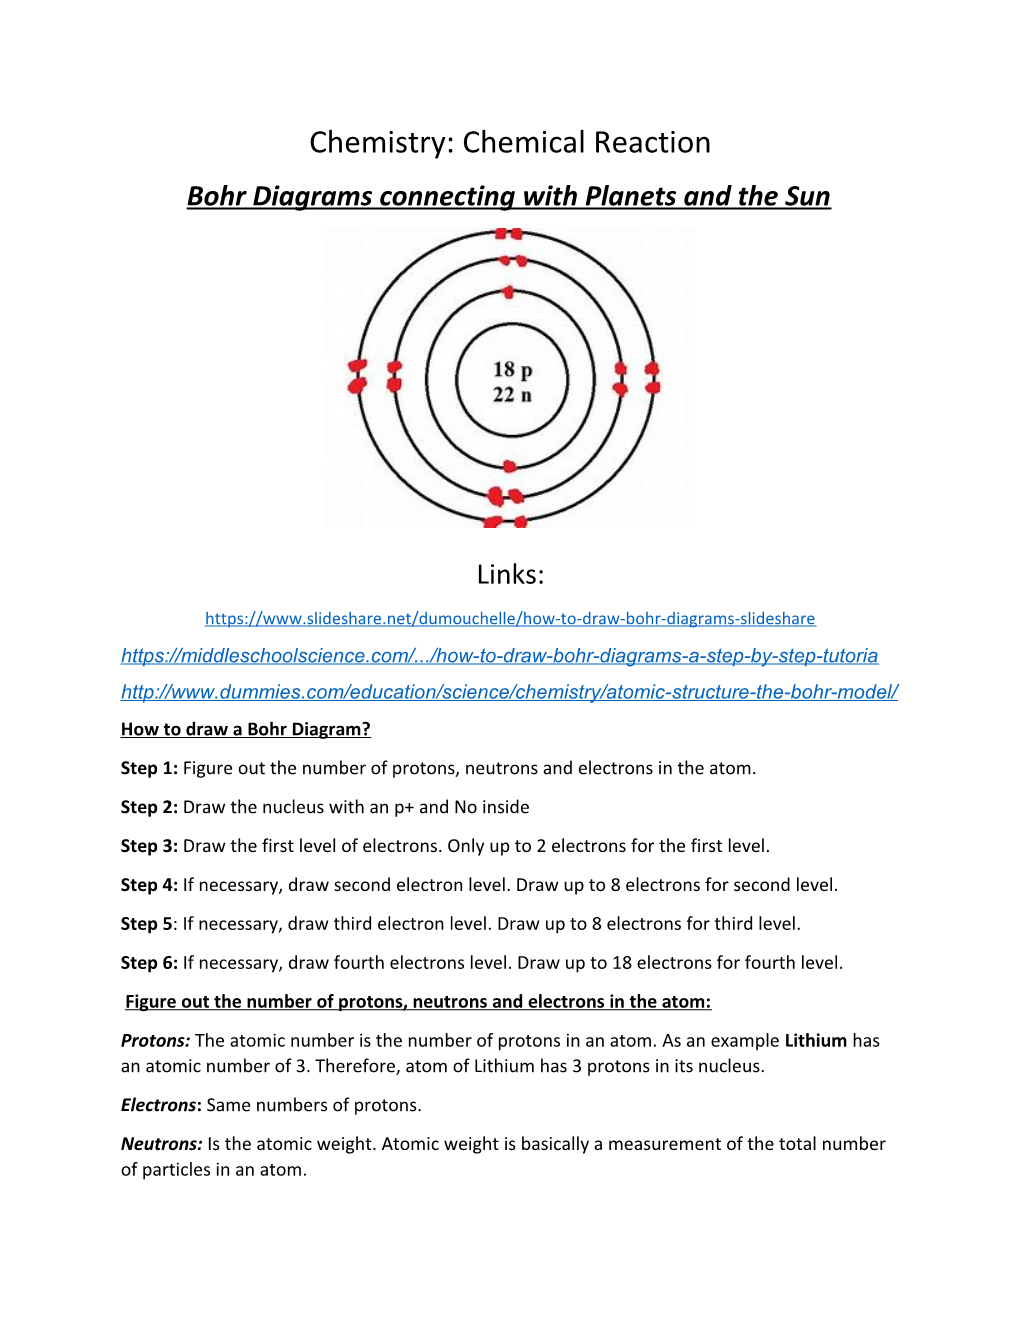 Bohr Diagrams Connecting with Planets and the Sun